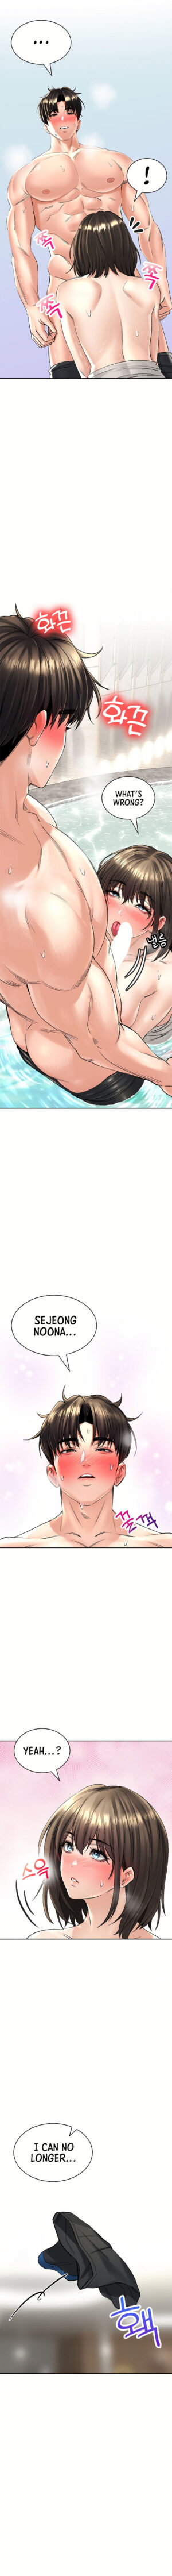 [Lee Juwon] Herbal Love Story (1-20.5) [English] [Omega Scans] [Ongoing]